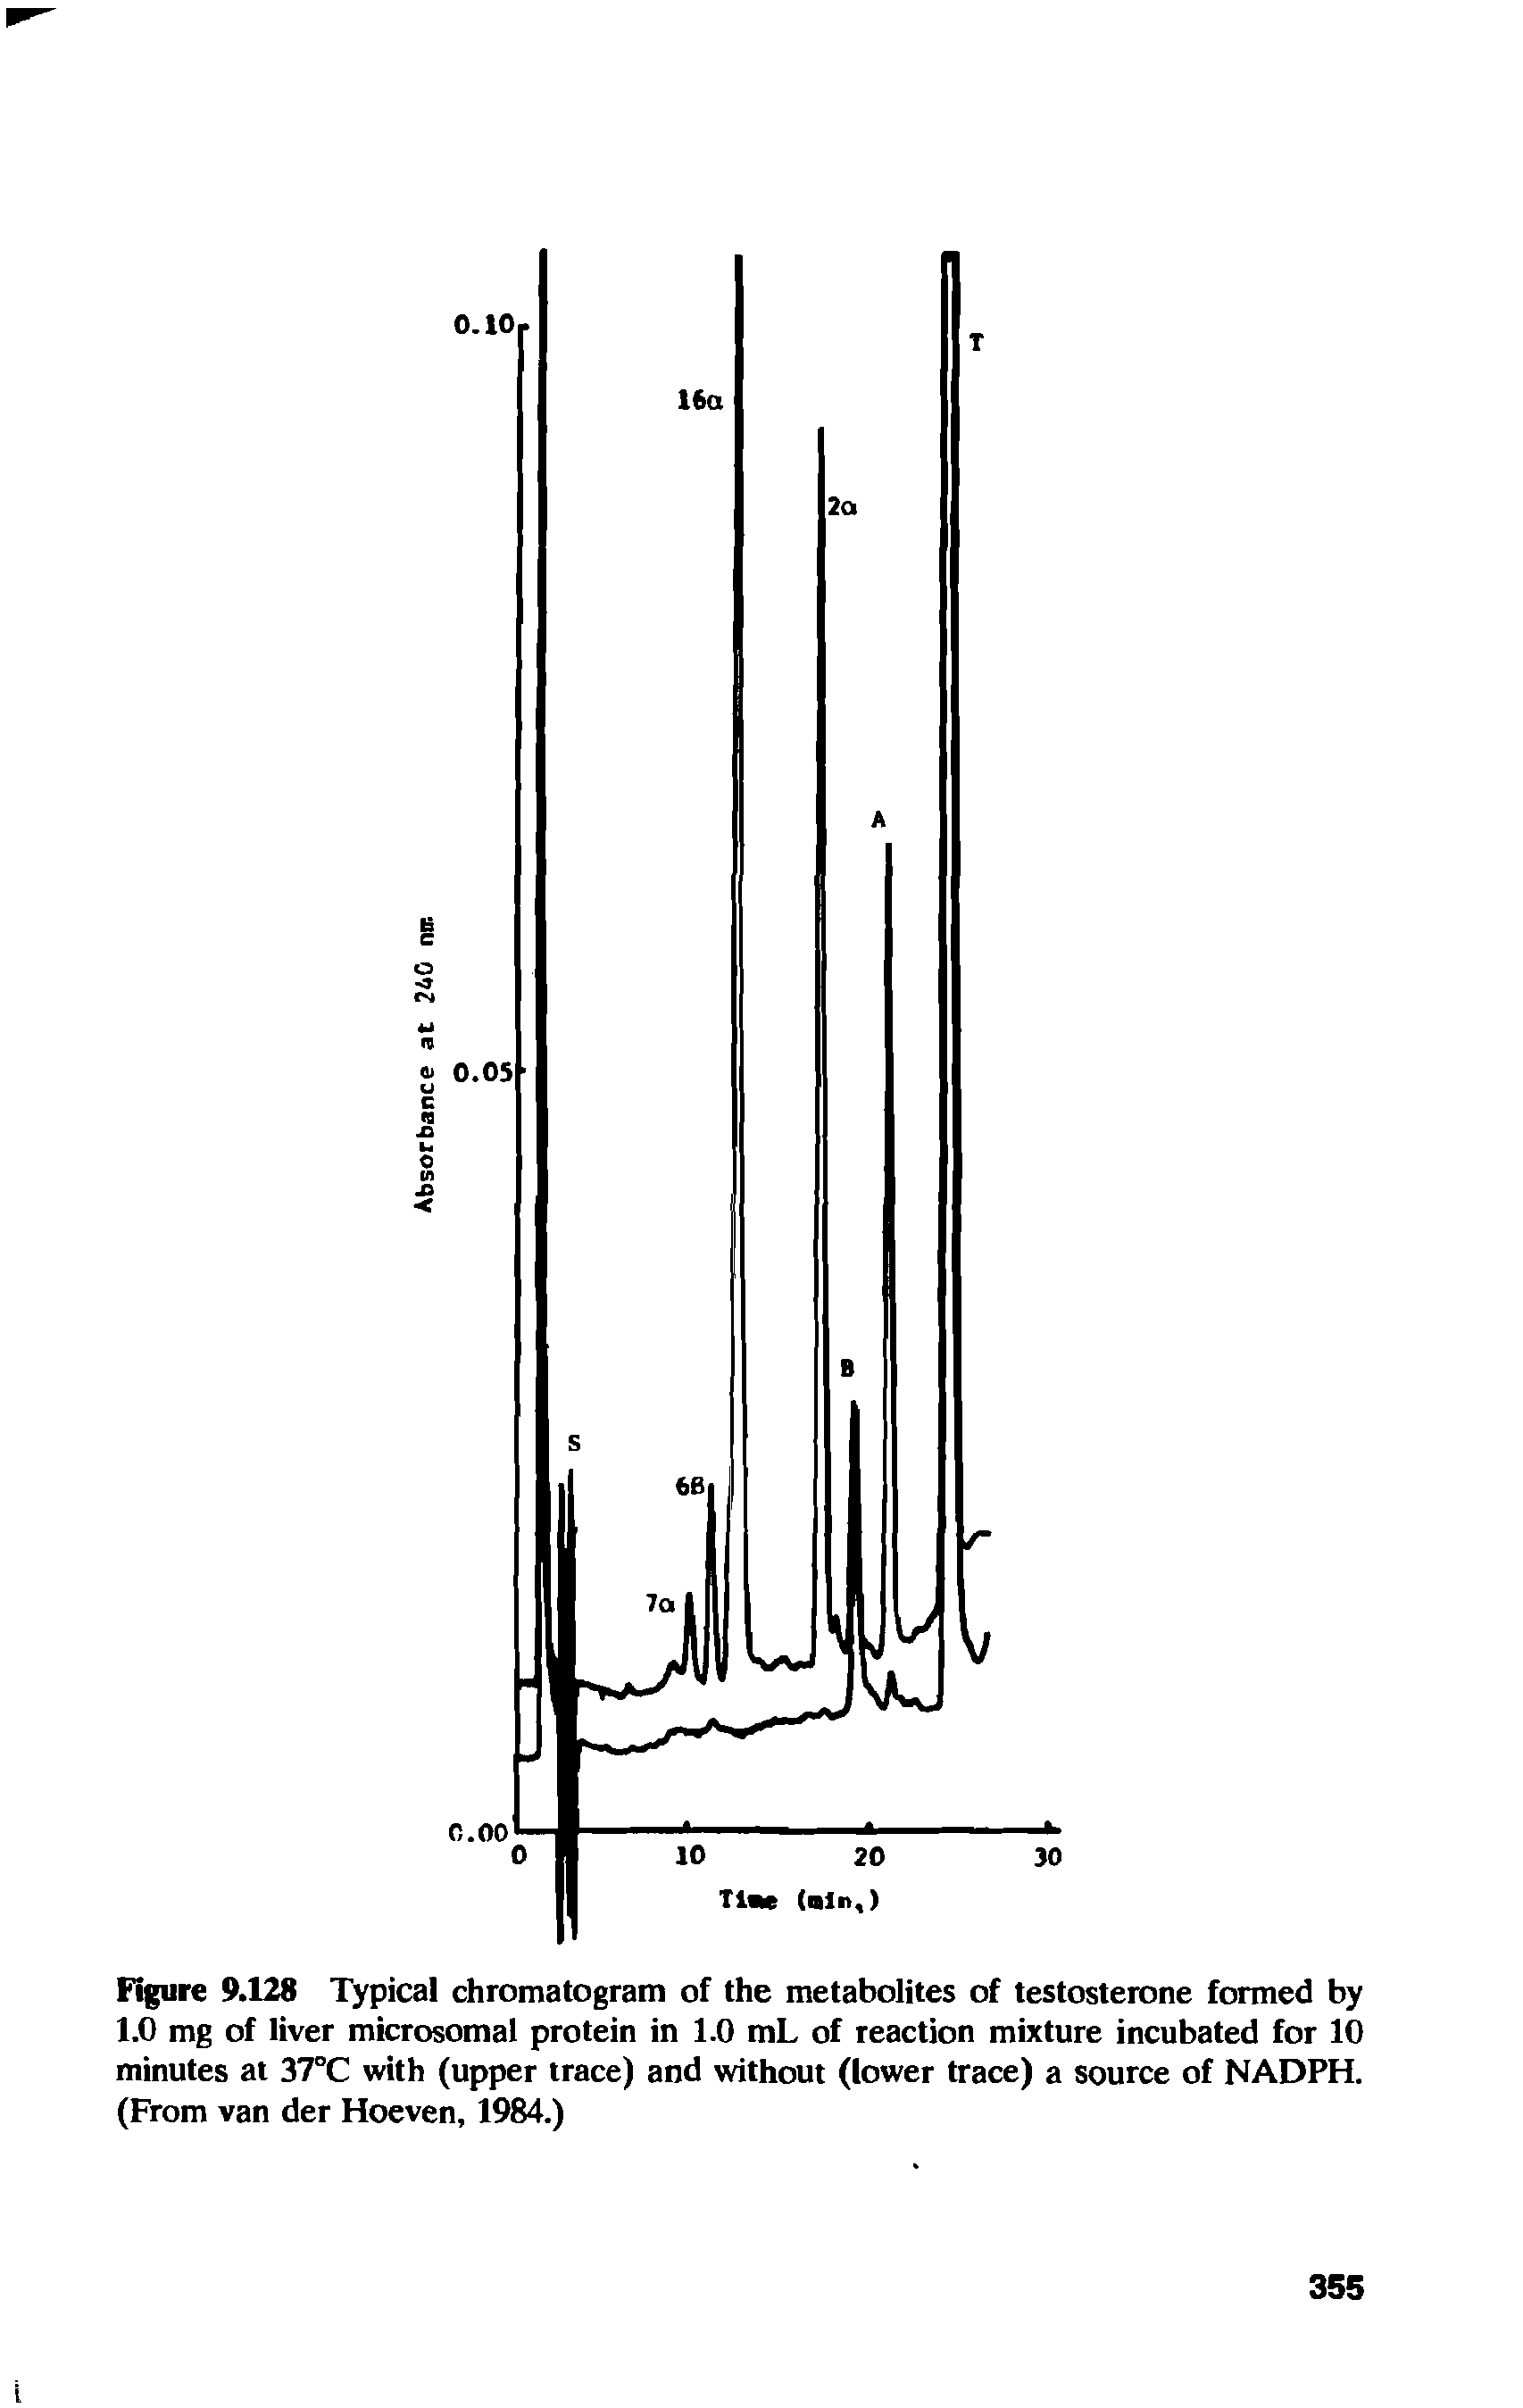 Figure 9.128 Typical chromatogram of the metabolites of testosterone formed by 1.0 mg of liver microsomal protein in 1.0 mL of reaction mixture incubated for 10 minutes at 37°C with (upper trace) and without (lower trace) a source of NADPH. (From van der Hoeven, 1984.)...